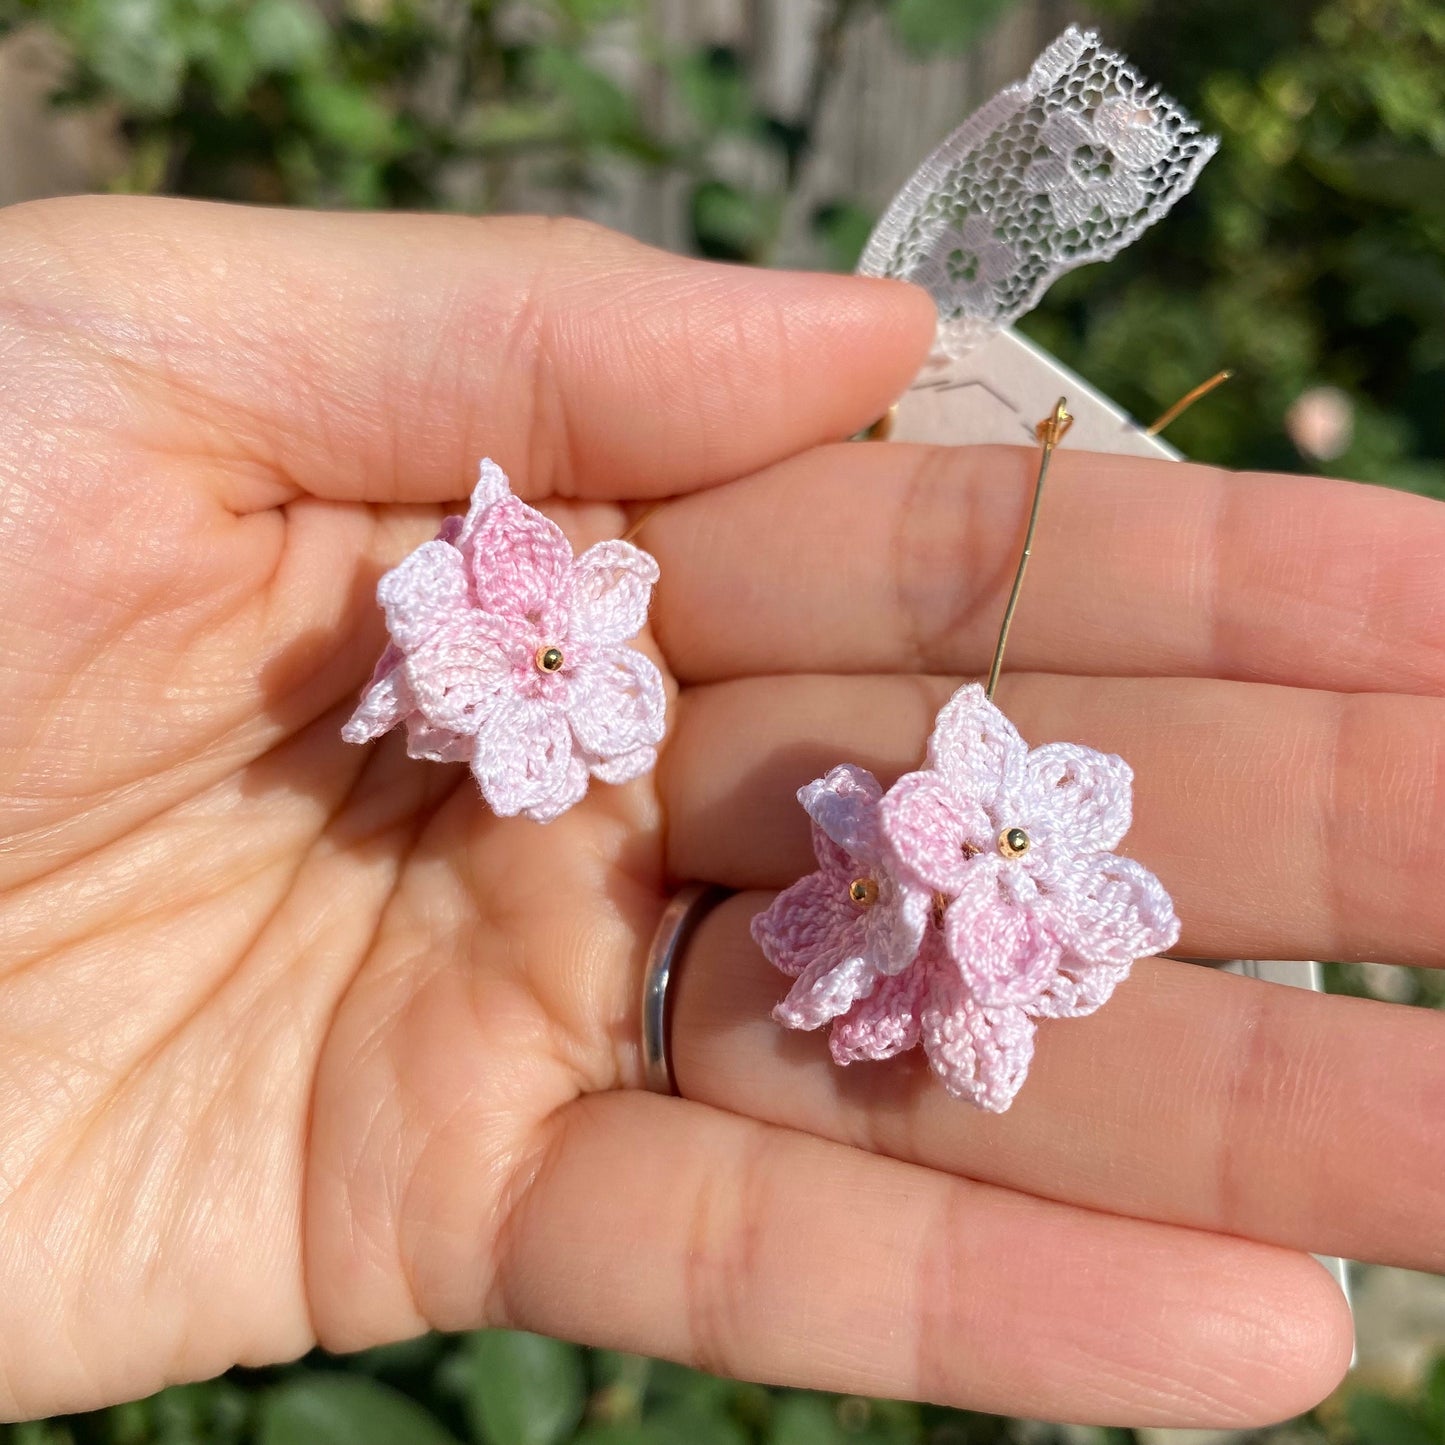 Pink Hydrangea flower cluster with pearls earrings/Microcrochet/Knitted jewelry/Summer earrings for her/Unique 5 petal flowers/Ship from US